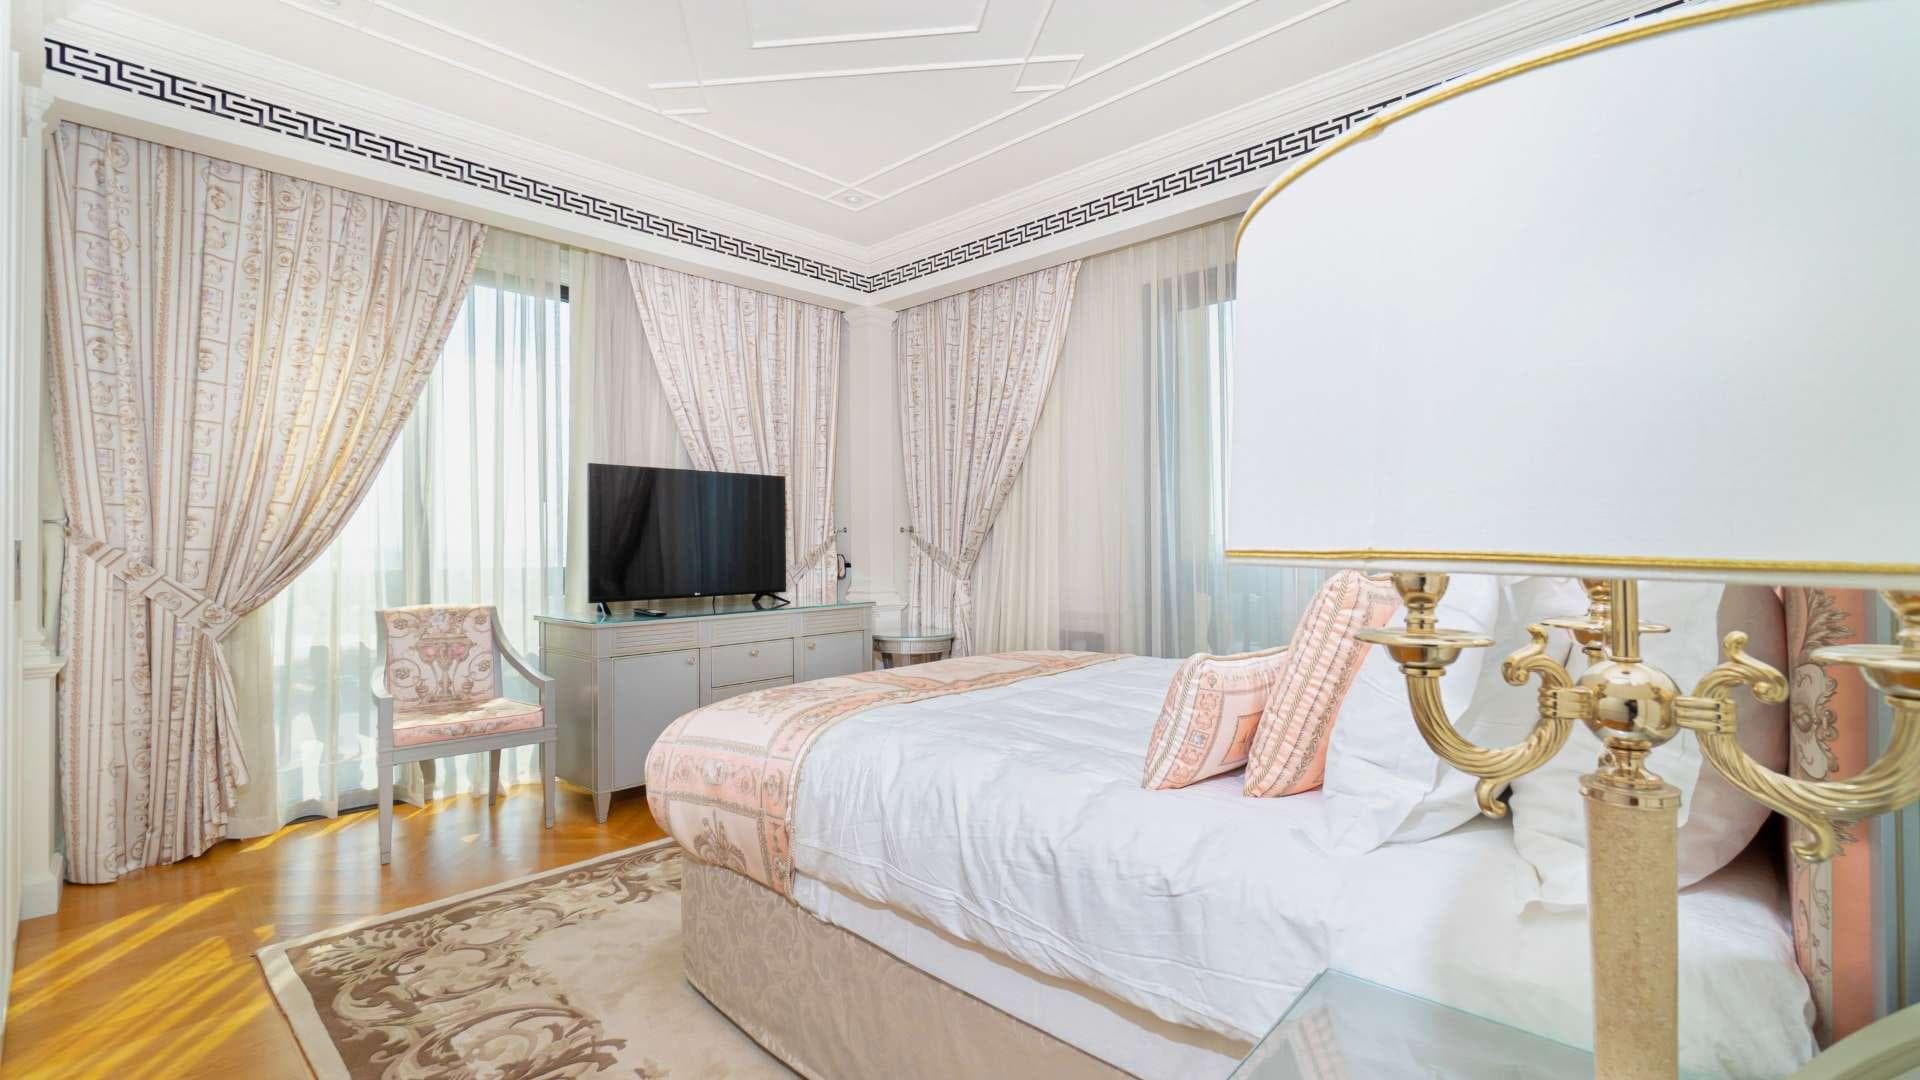 3 Bedroom Apartment For Sale Palazzo Versace Lp18598 24a9500f64005800.jpg